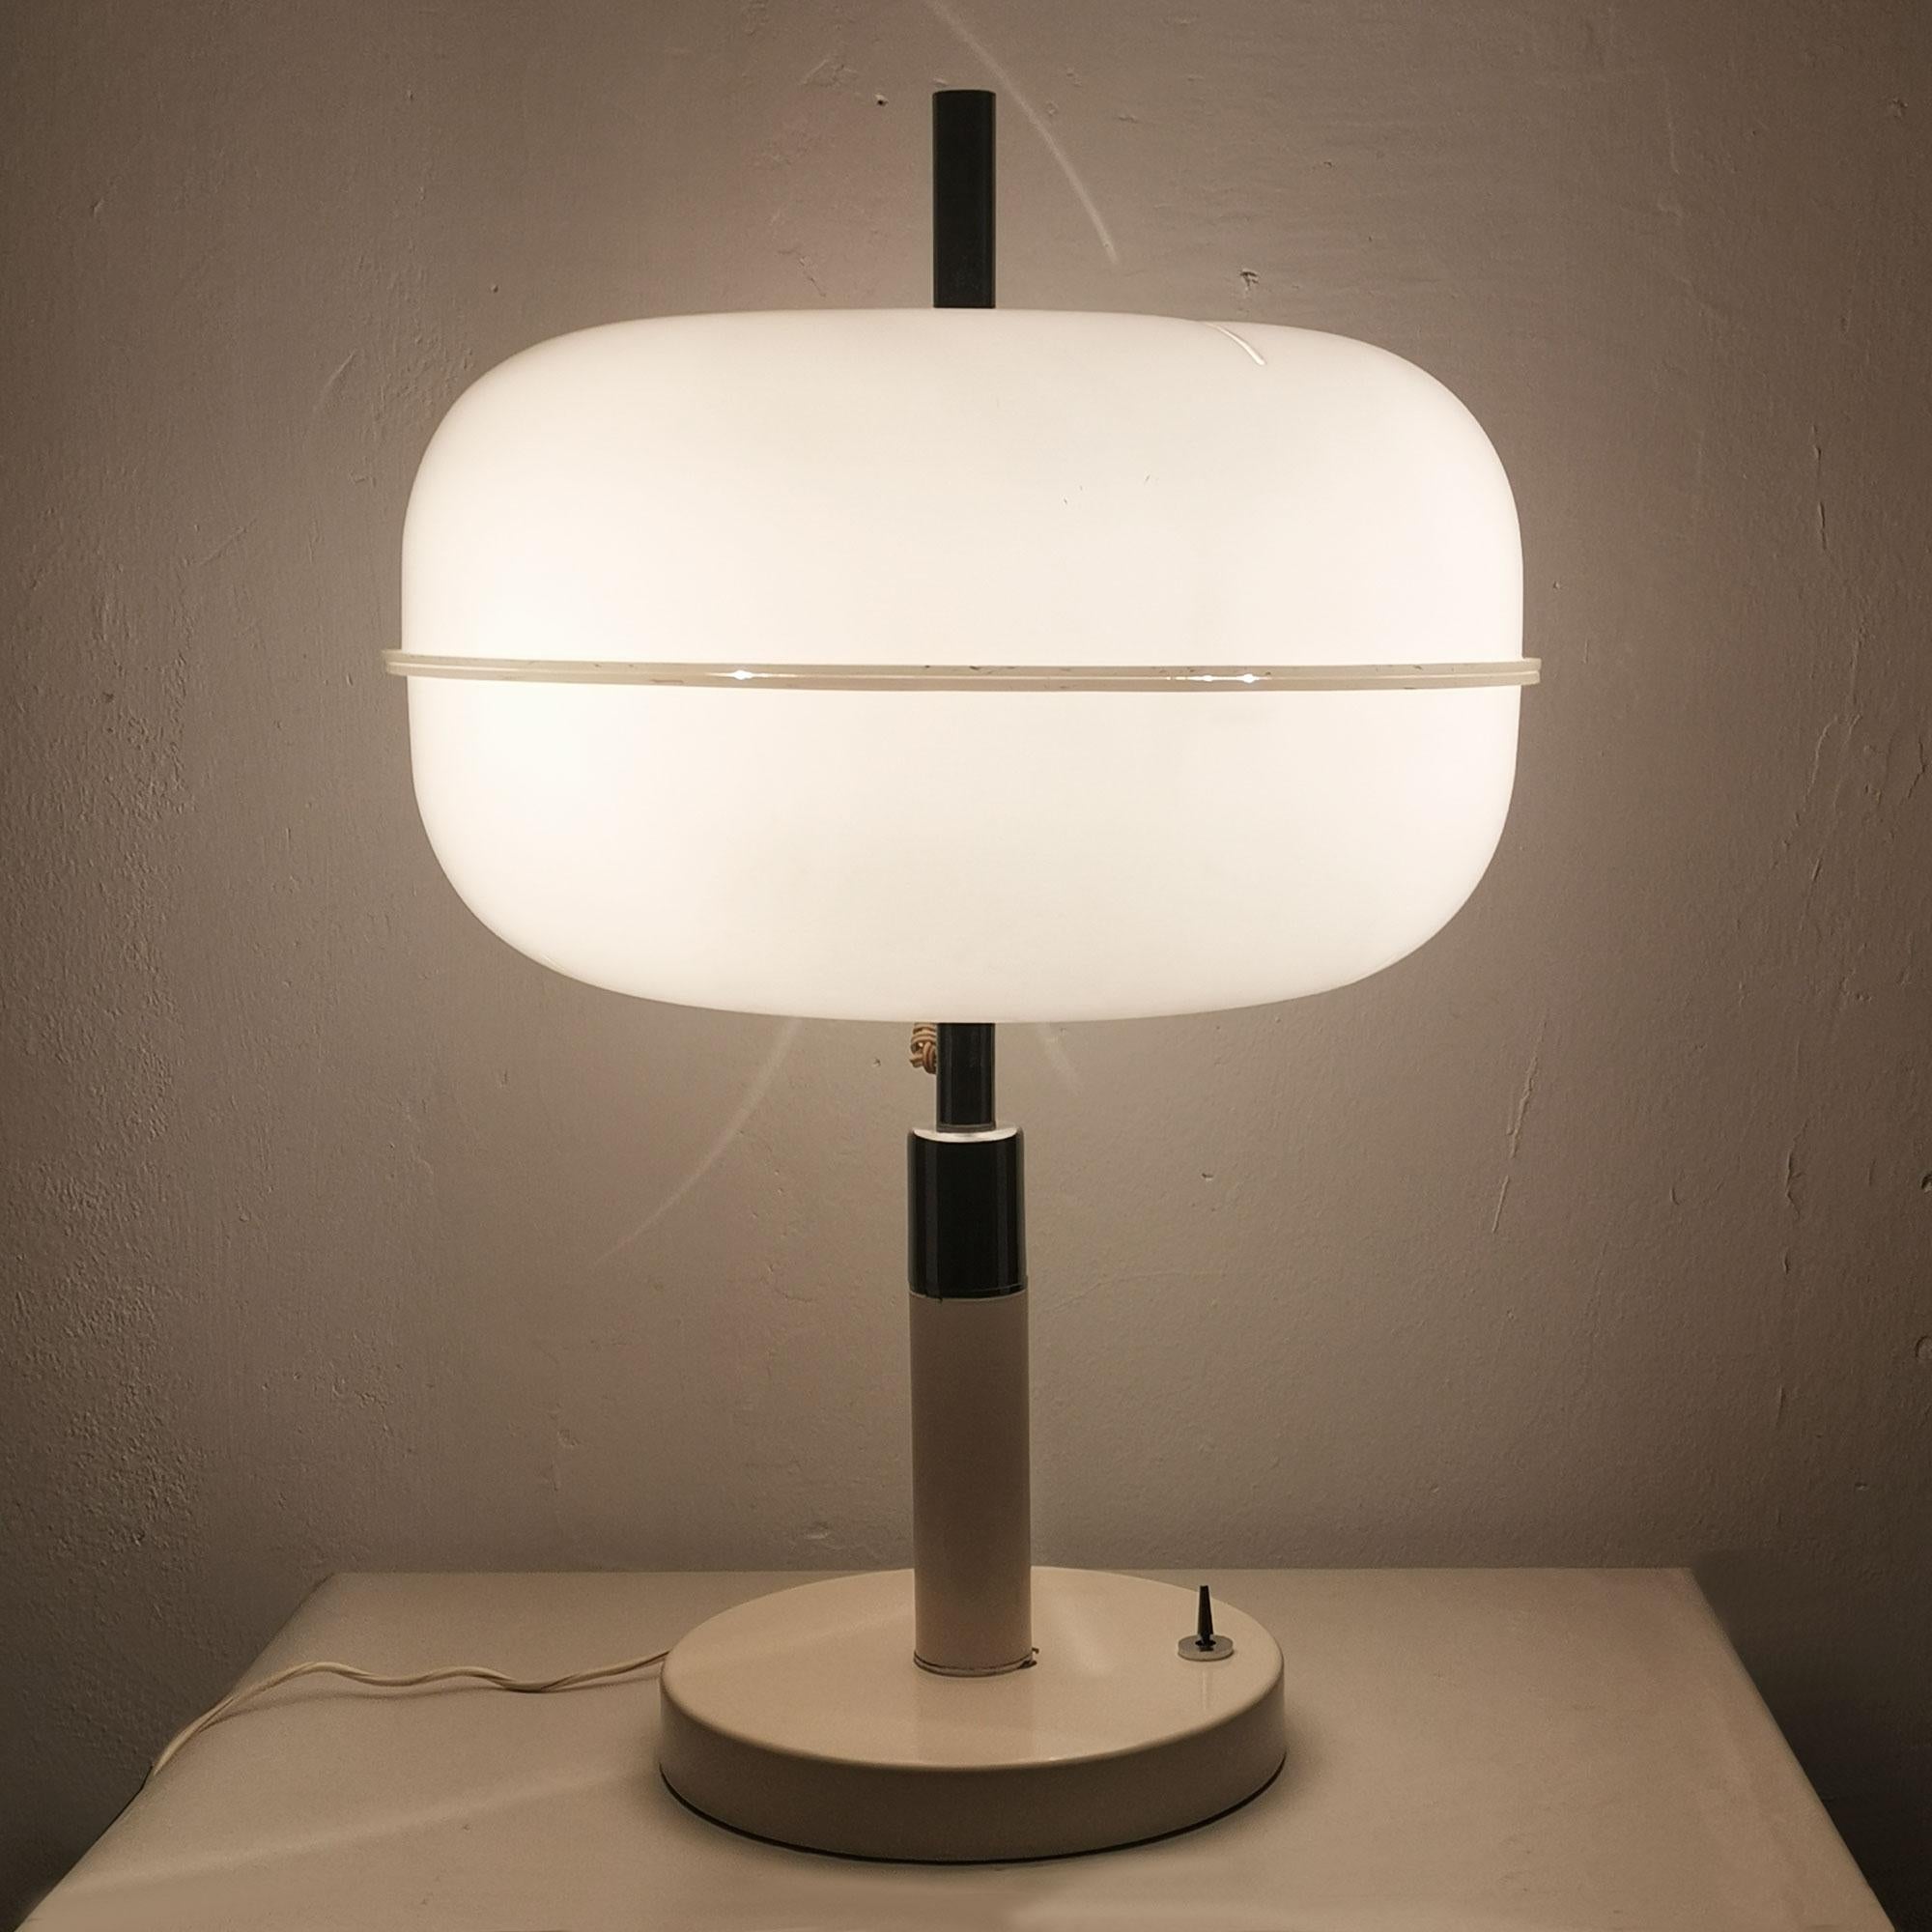 Modern Enric Franch's Toro Table Lamp In Steel, Metal And Plexiglass - Spain, 1976 For Sale